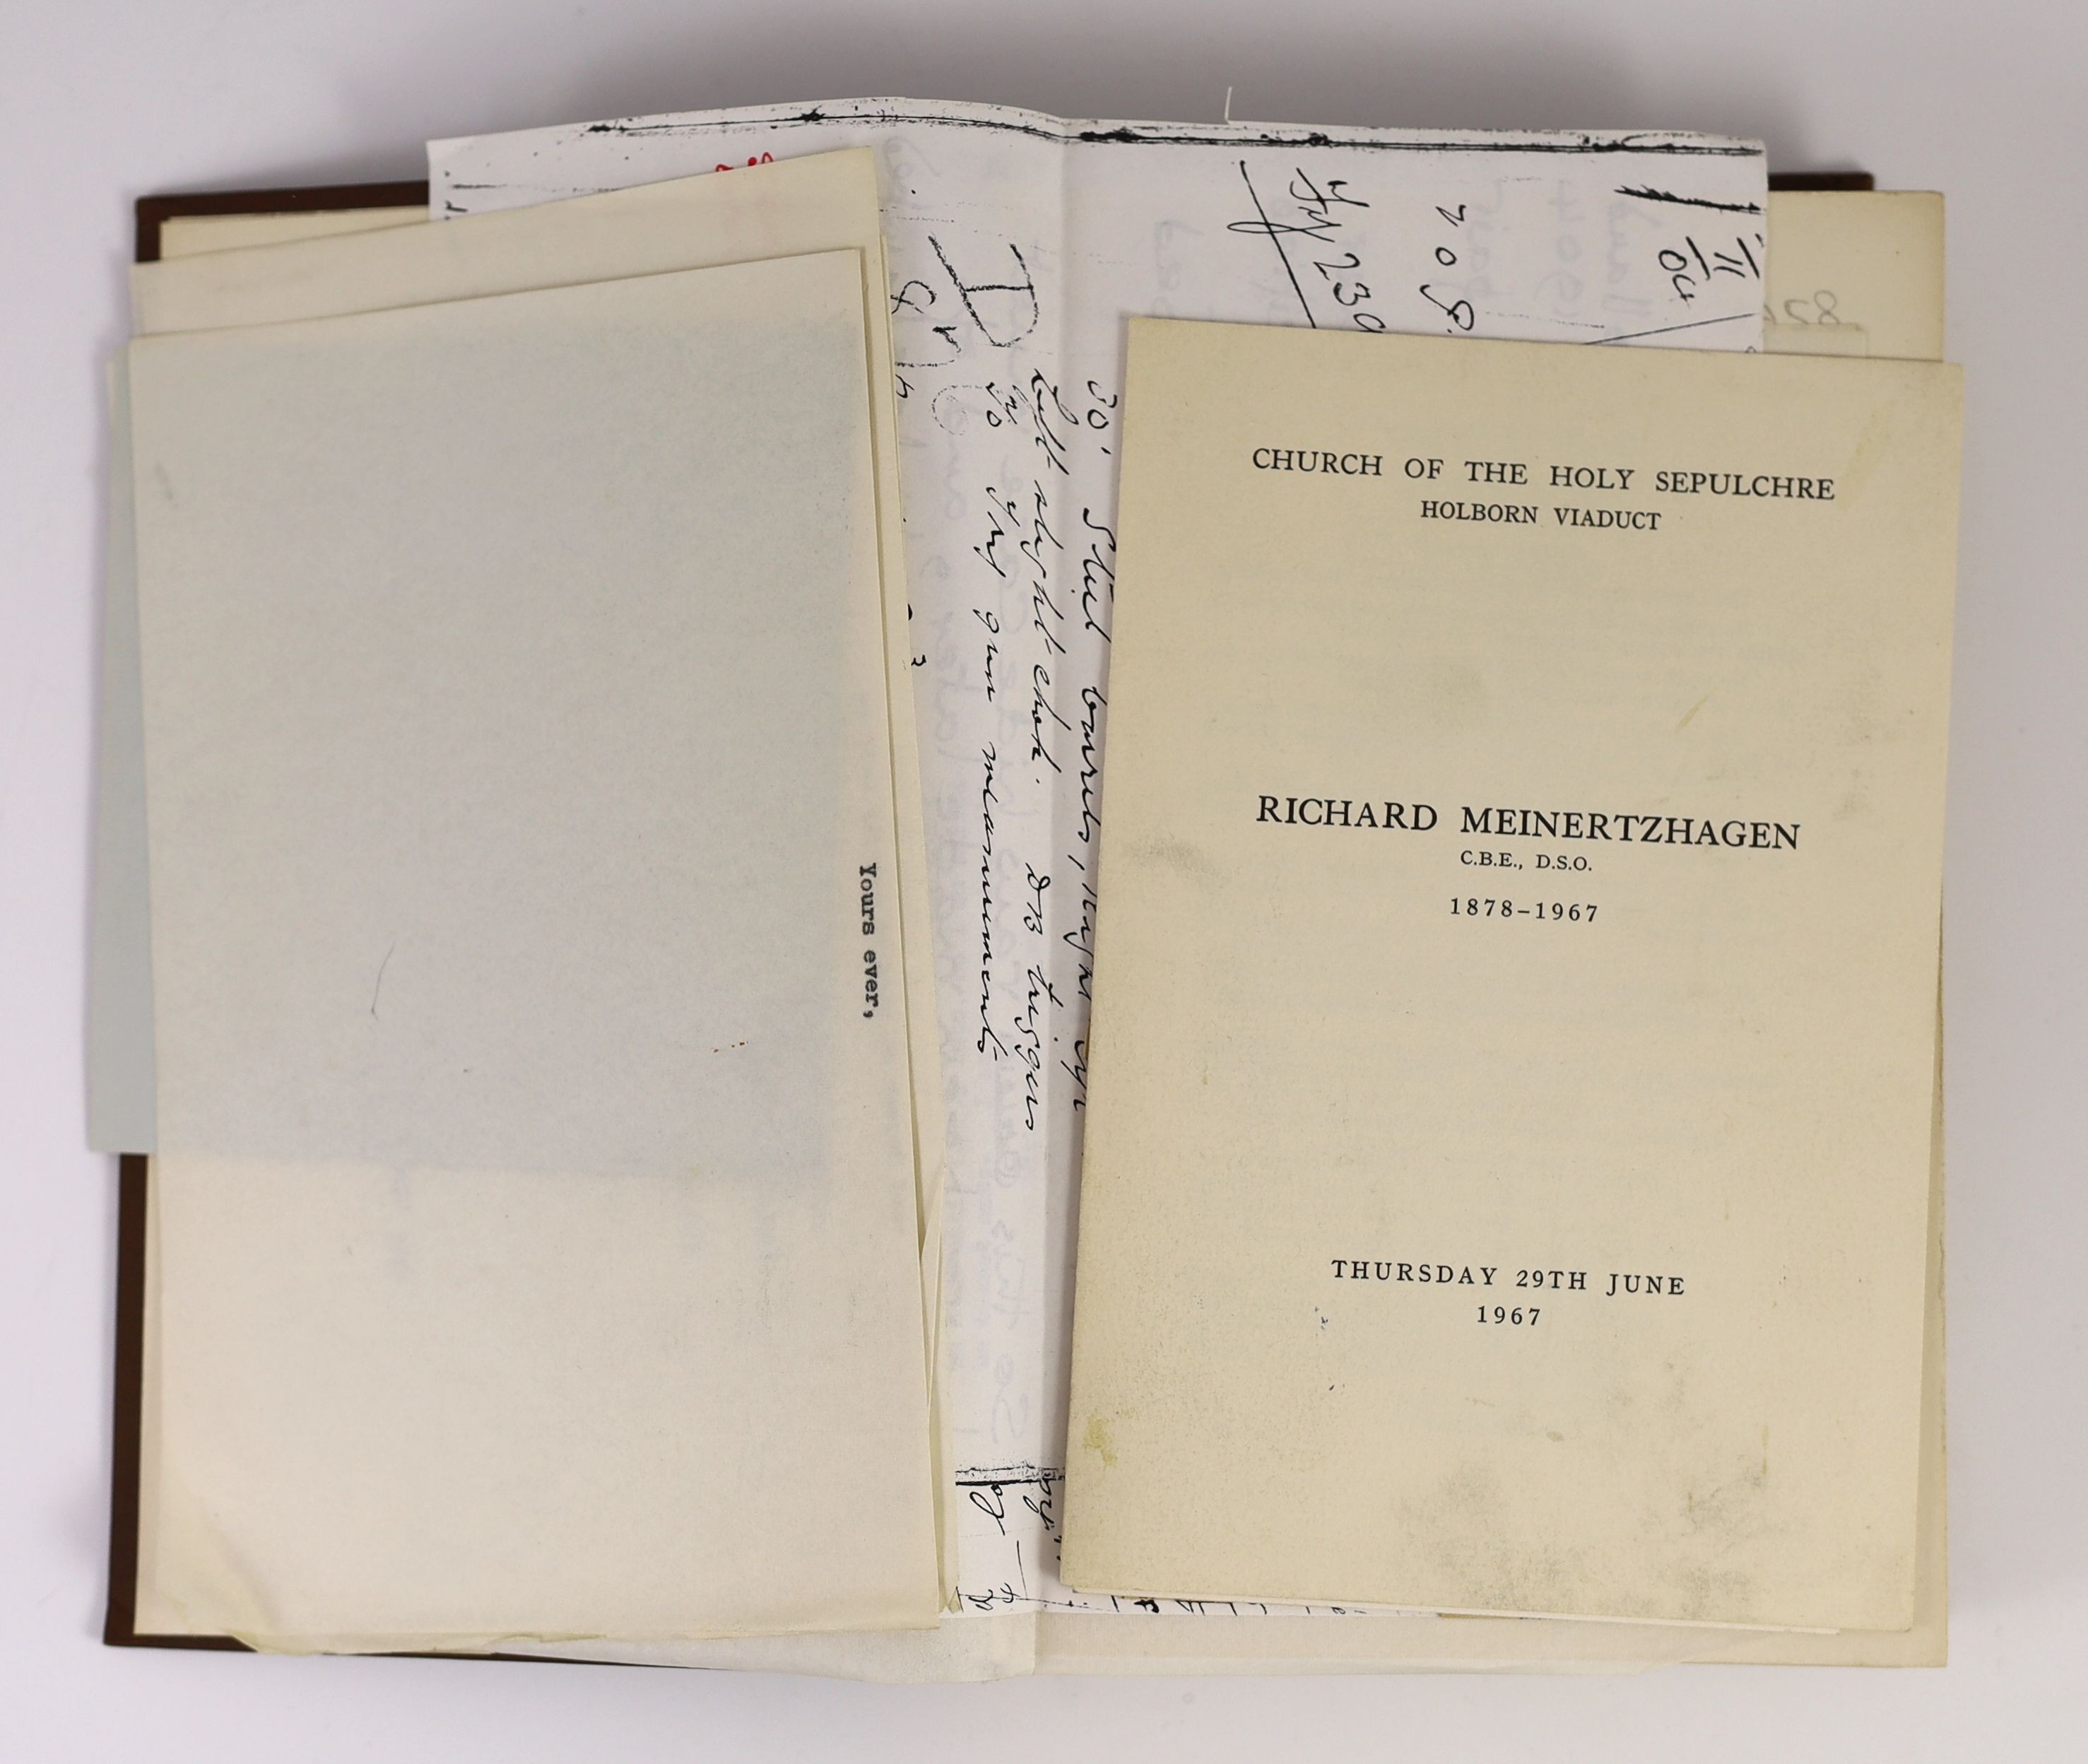 Meinertzhagen, Colonel Richard. Kenya Diary 1902 – 1906. Edinburgh & London, 1957. Original cloth binding rubbed and slightly bent out of shape. * With Meinertzhagen’s bookplate inside the front cover, Michael Lyell’s pe